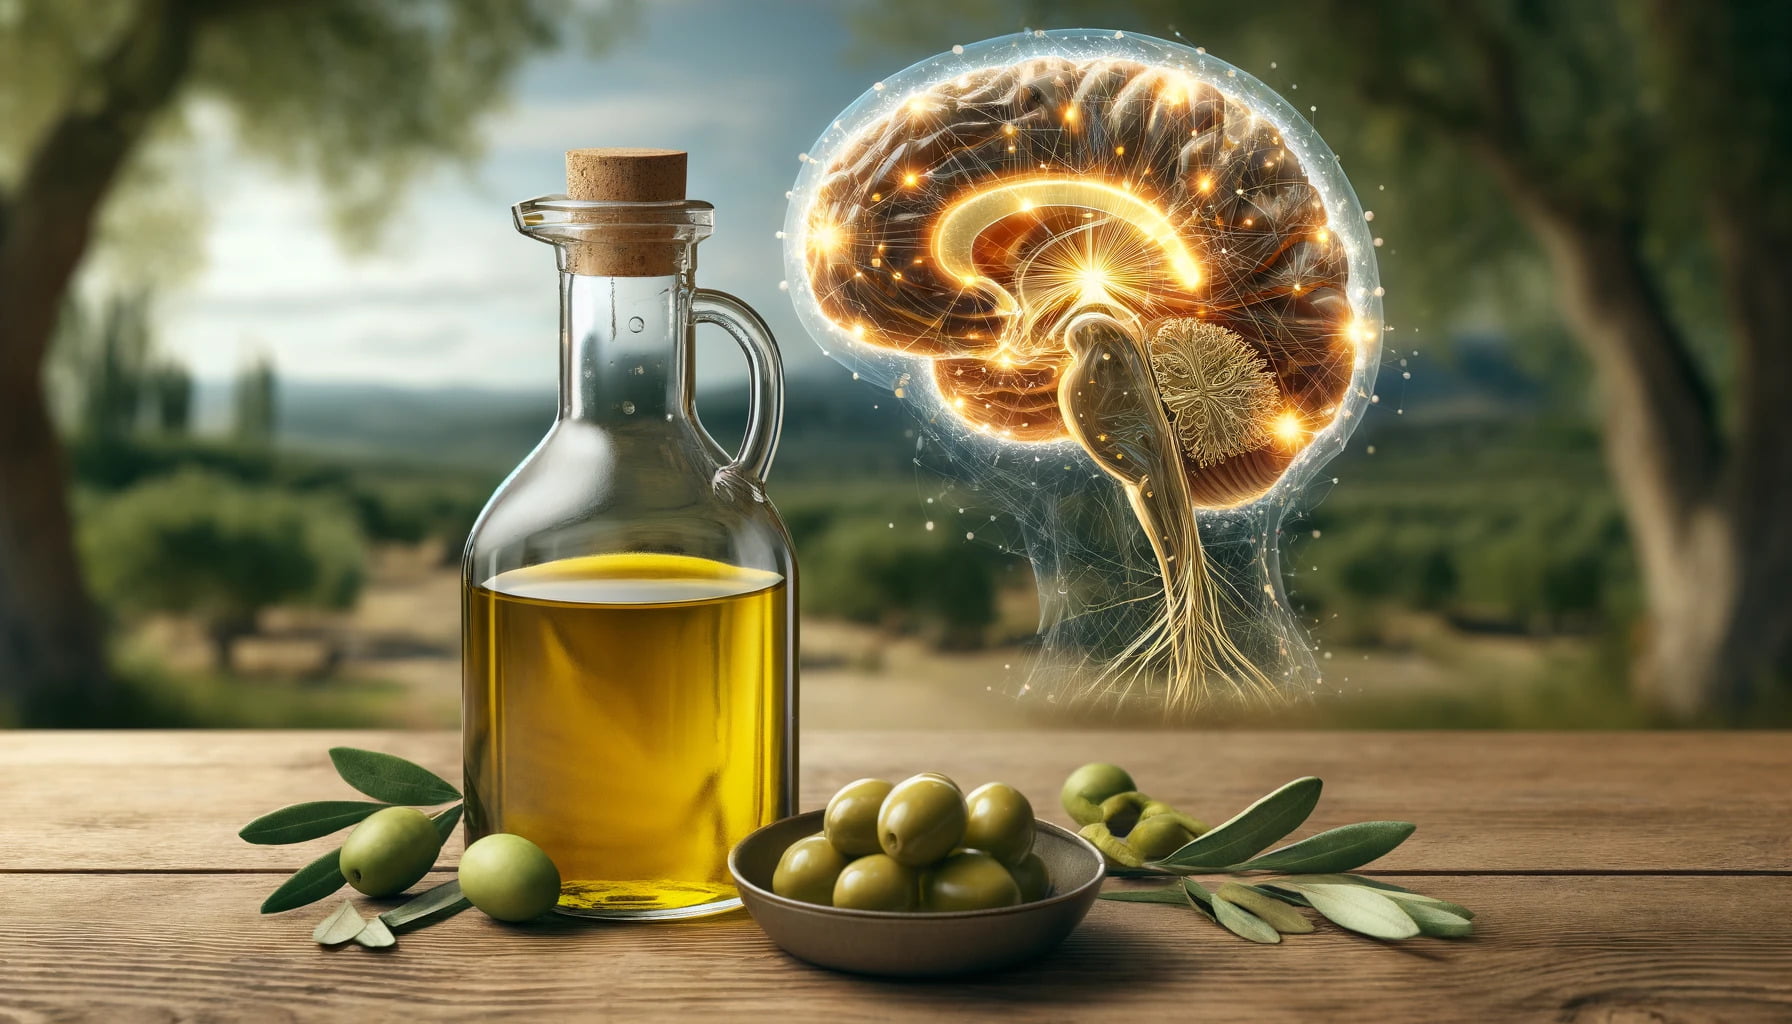 A photorealistic image of a bottle of olive oil alongside a depiction of its cognitive enhancing effects on the brain.